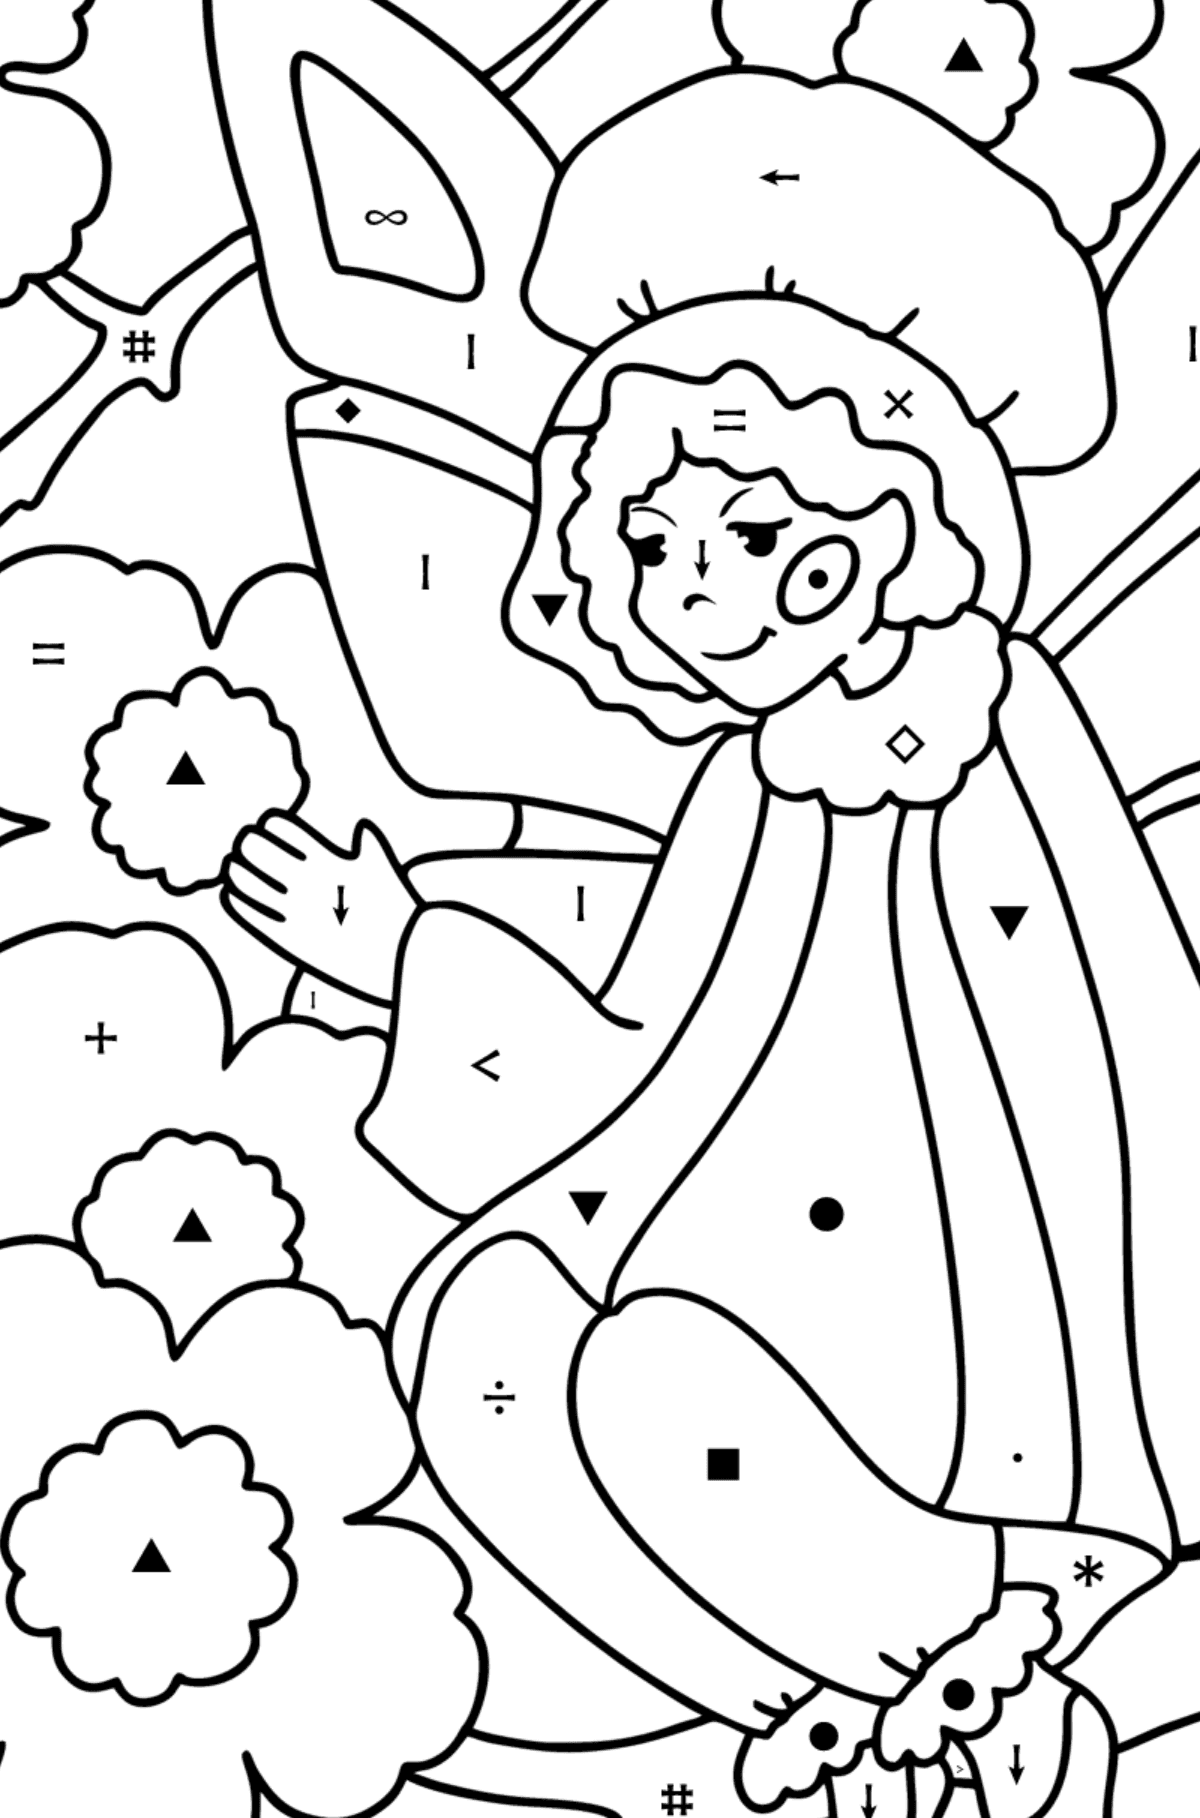 Fairy on a flower coloring page - Coloring by Symbols for Kids